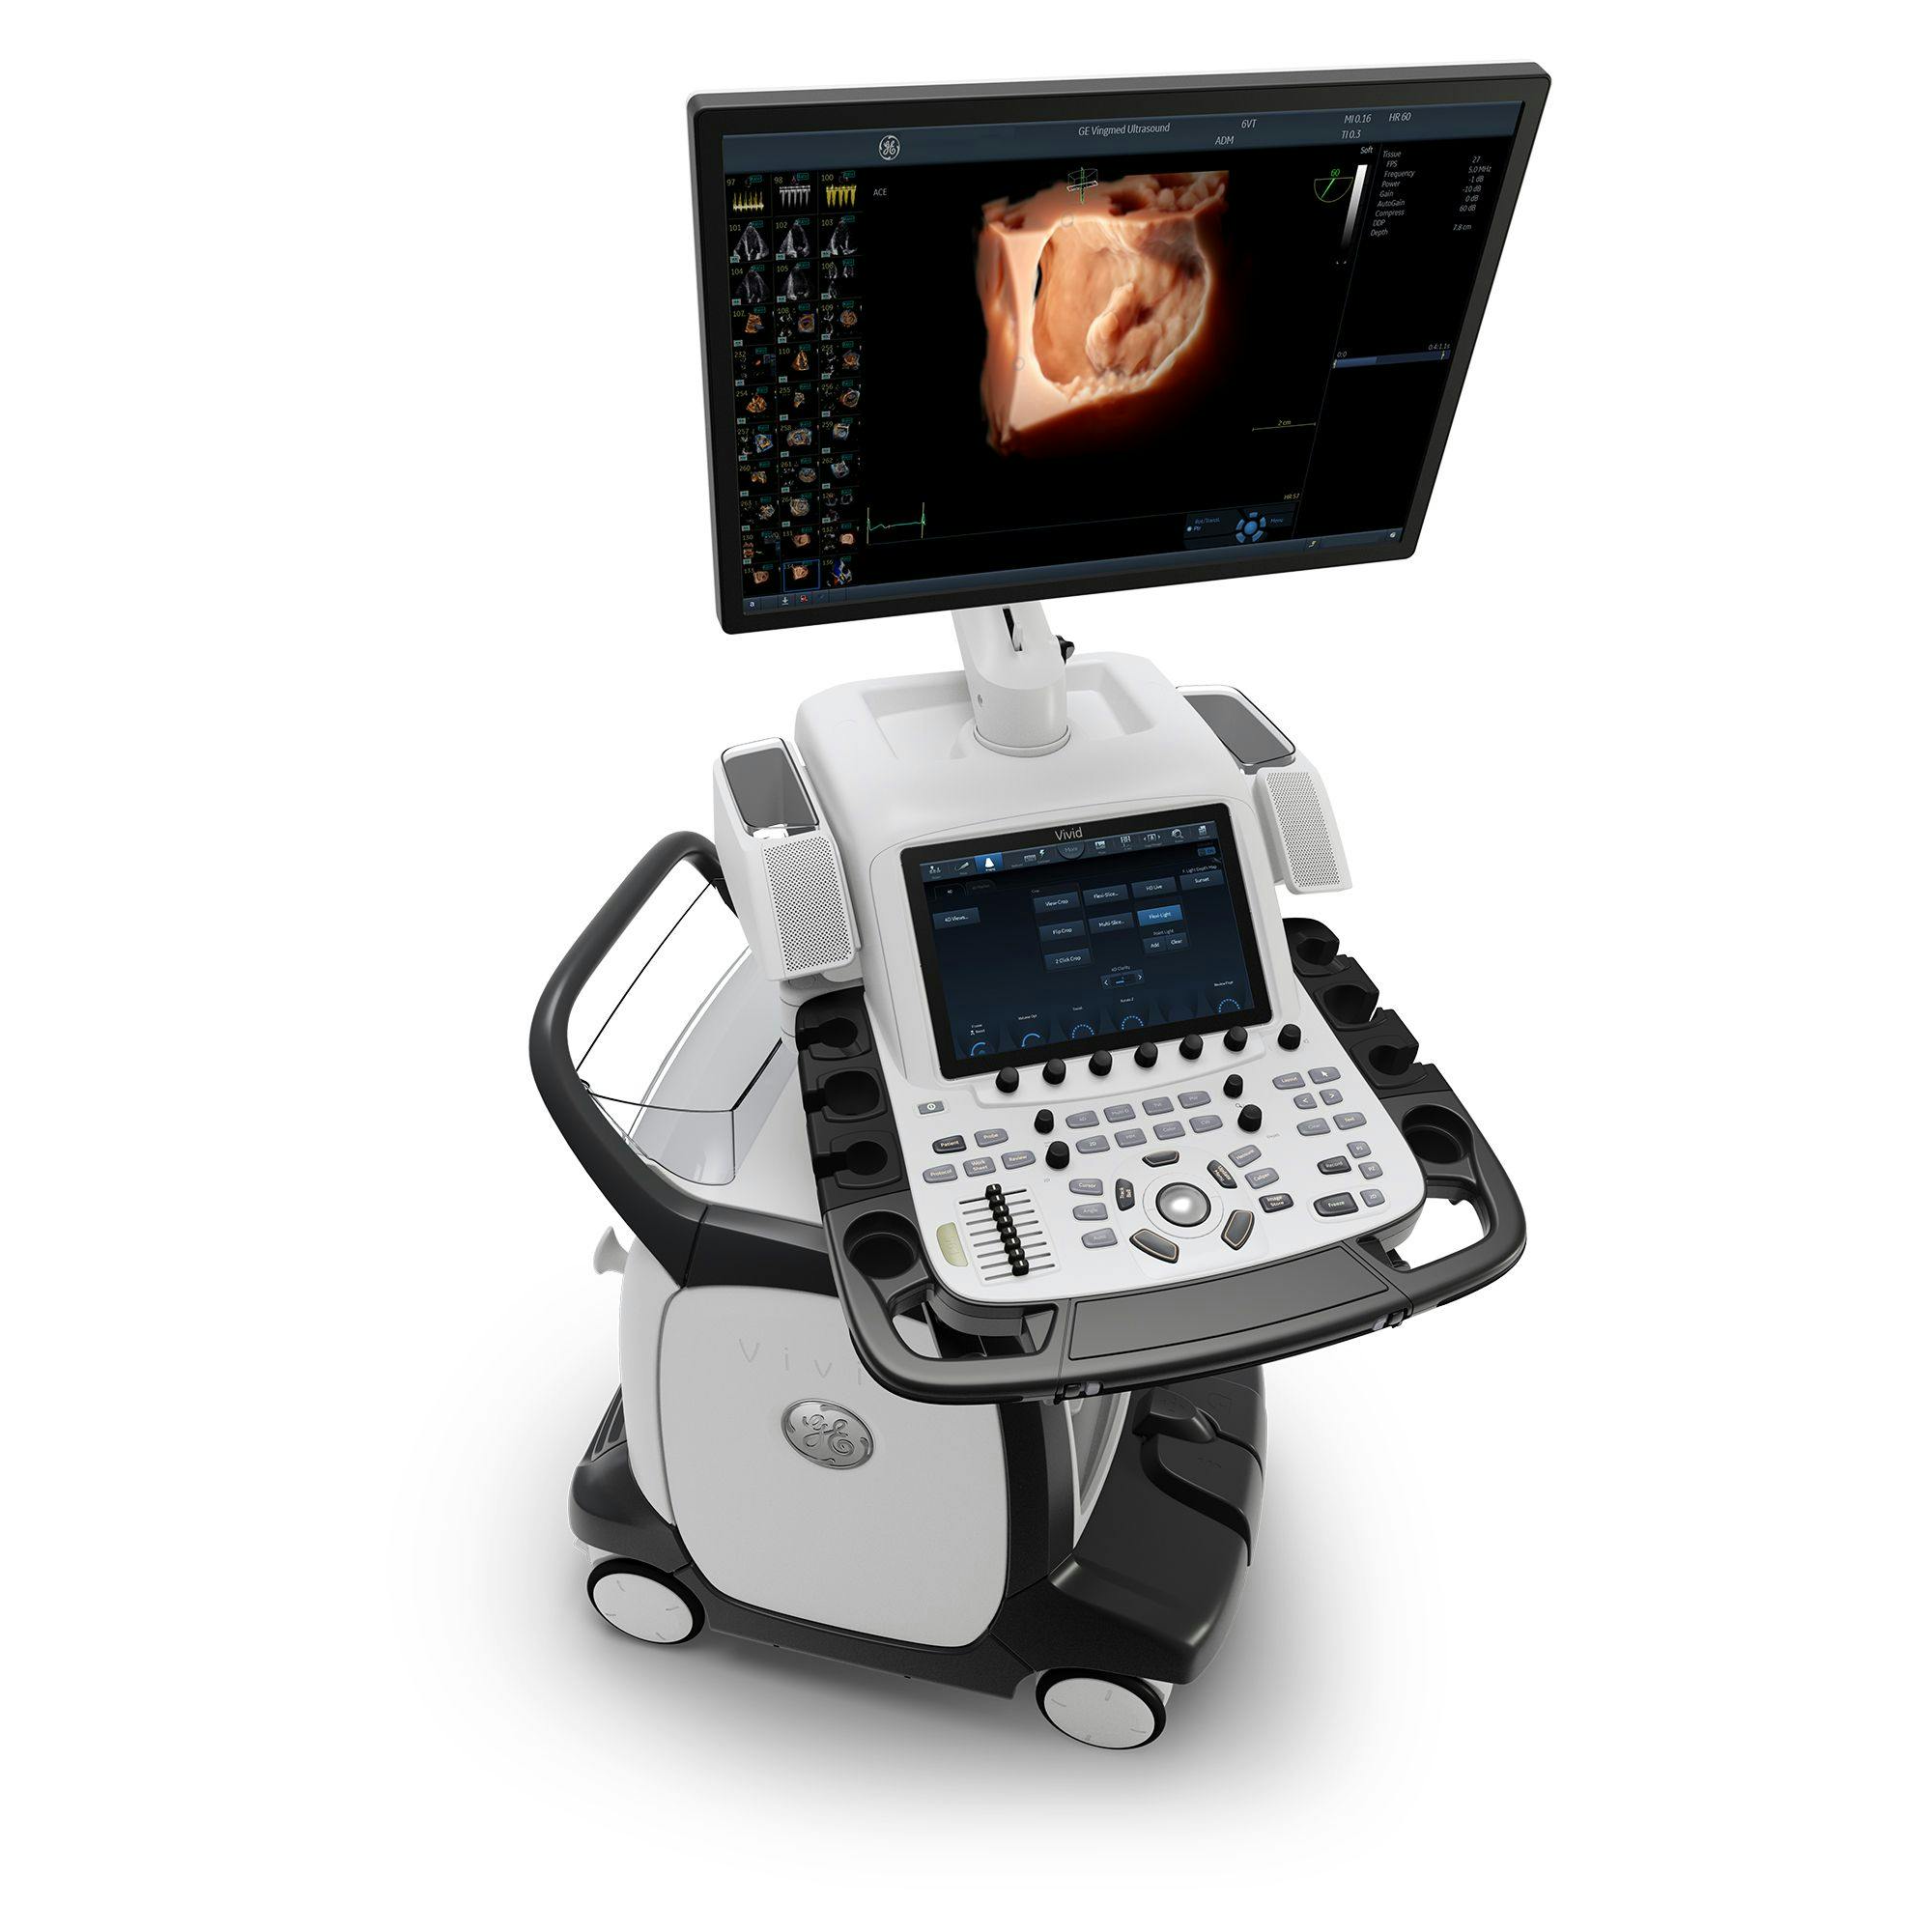 GE Healthcare Secures FDA Clearance for Faster, More Consistent Cardiovascular Ultrasound